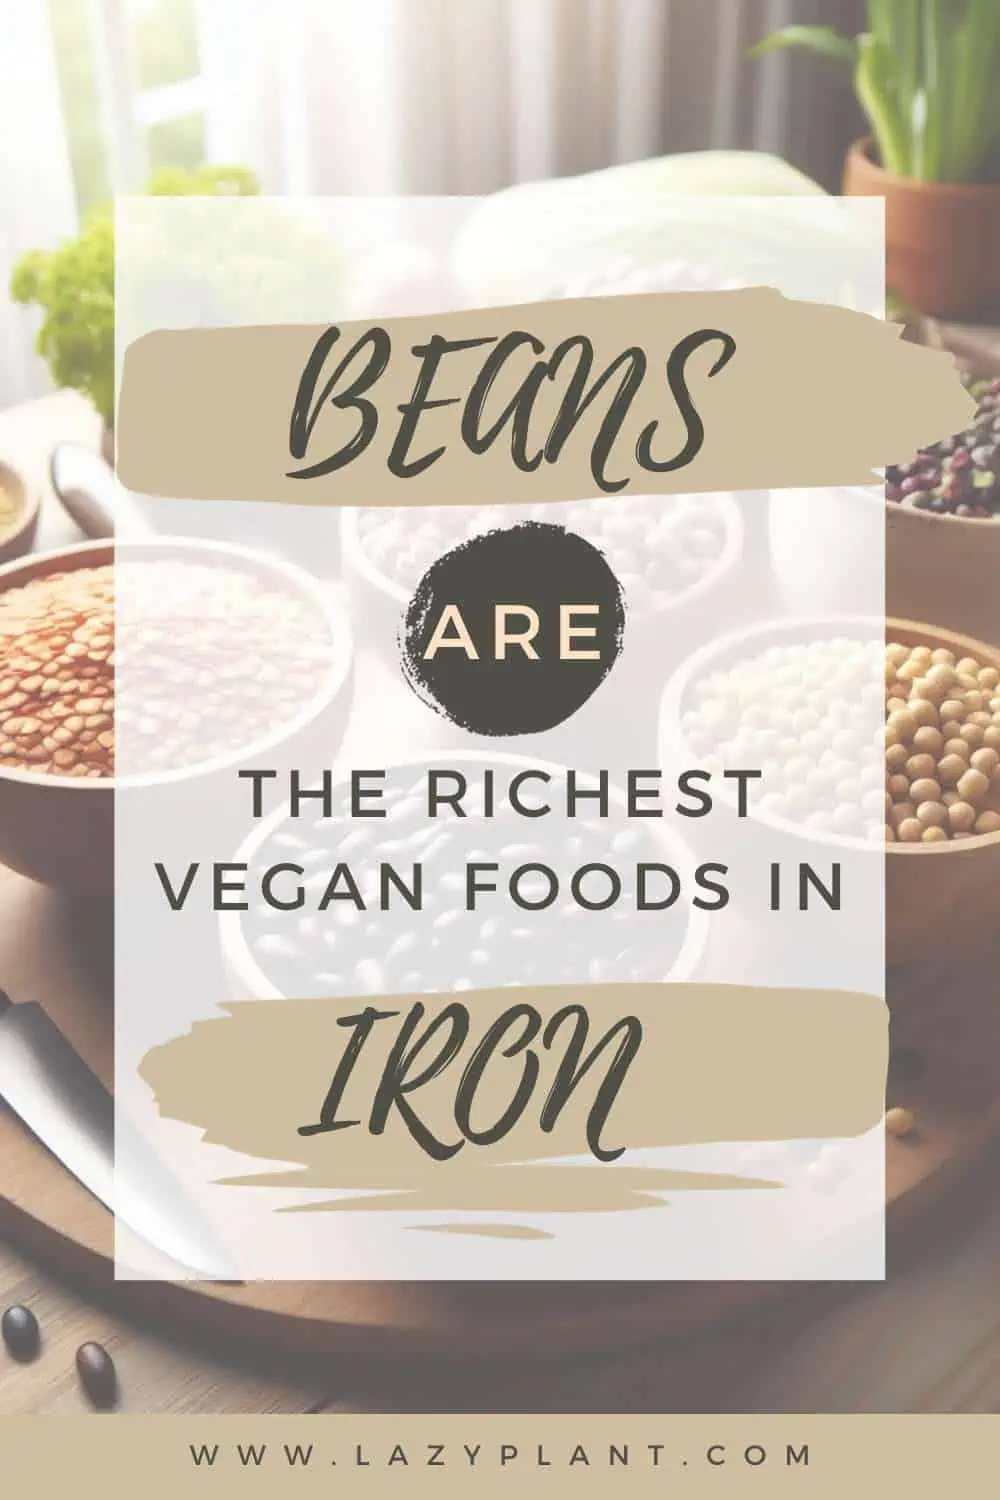 The Iron content of beans.